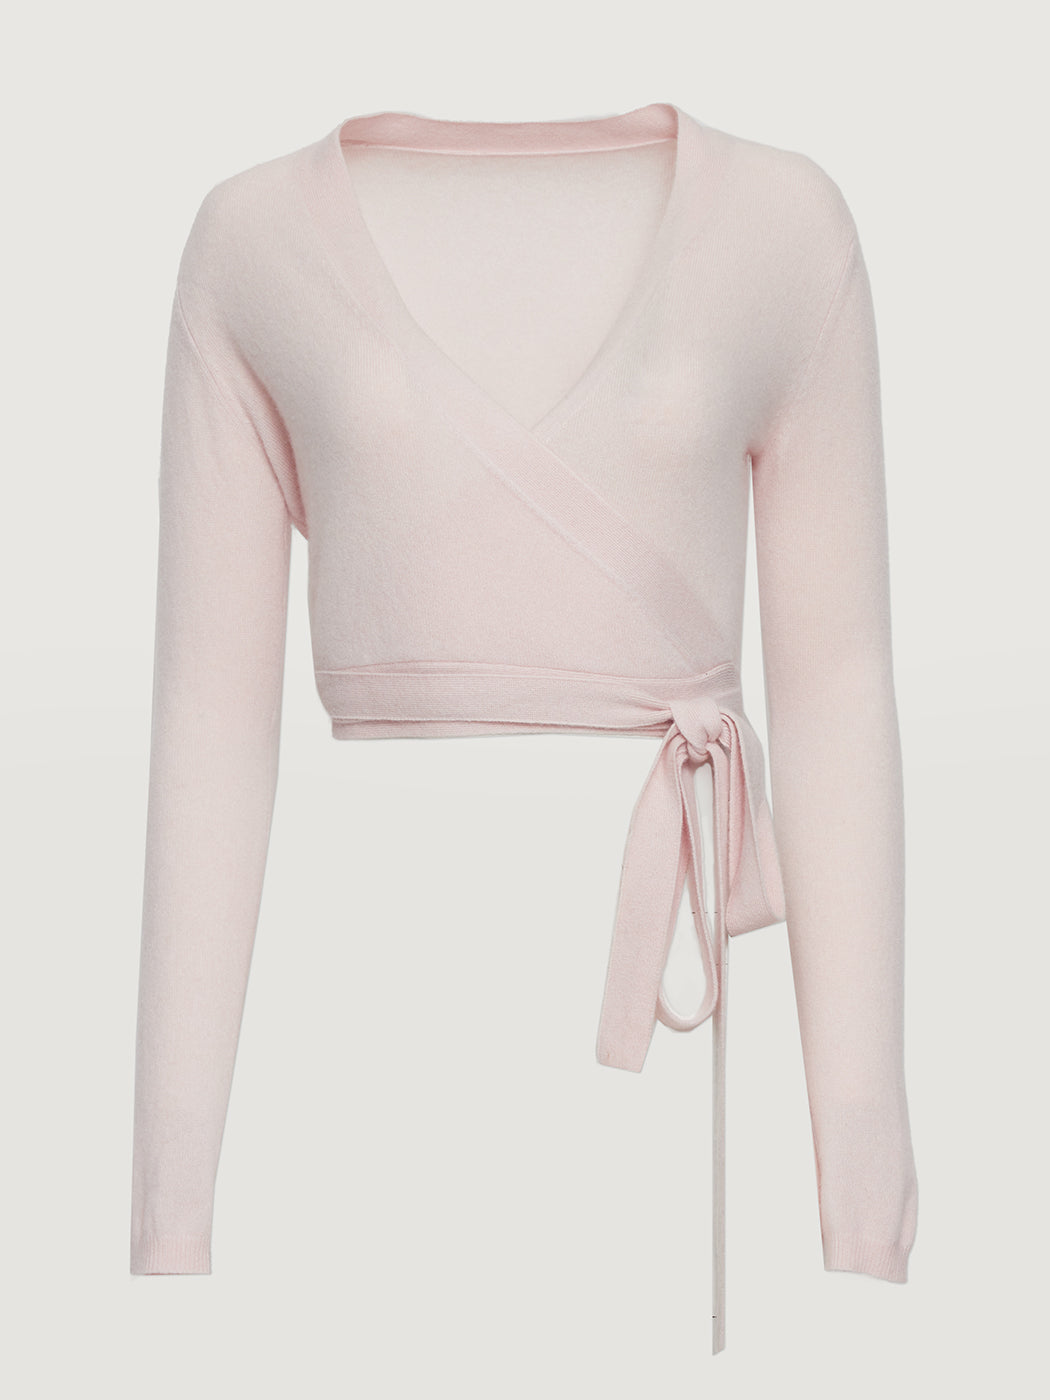 – Sweater Rosewater Carbon38 Cashmere Wrap -